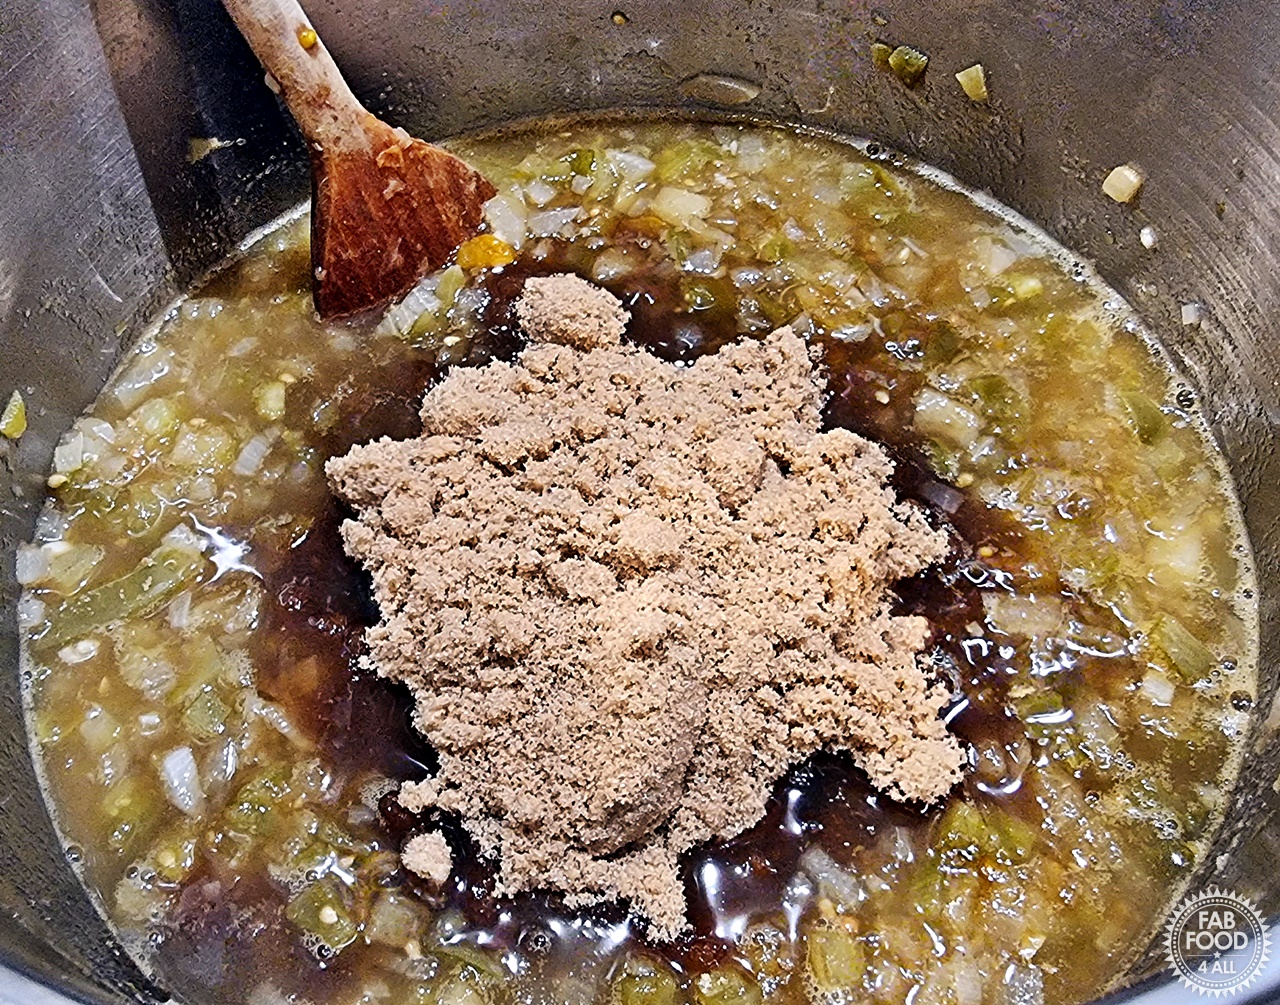 Light soft brown sugar added to the pan.